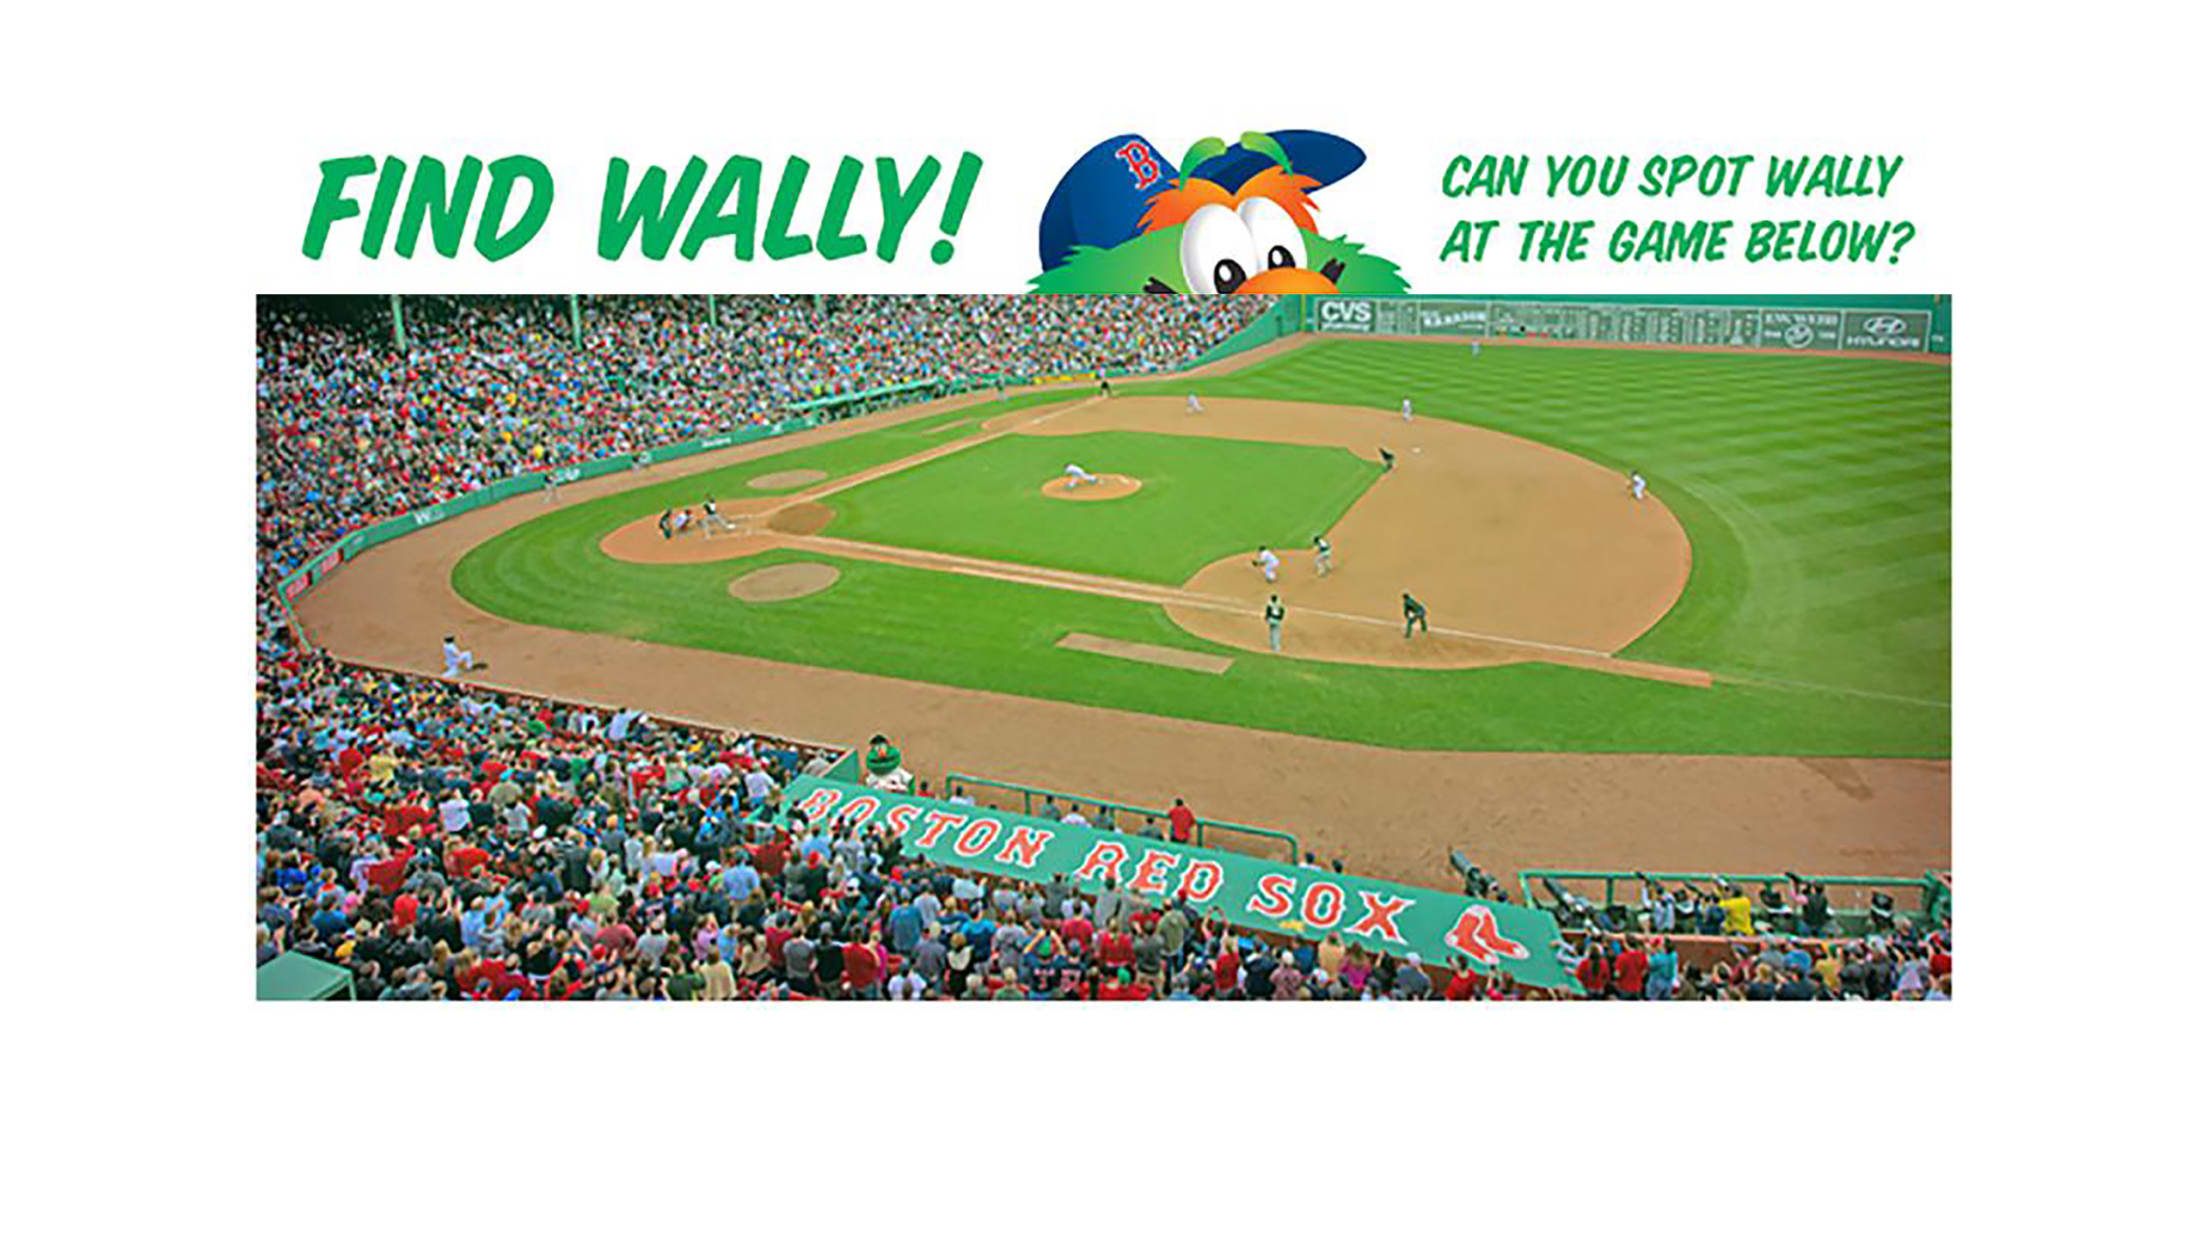 Wally's Clubhouse